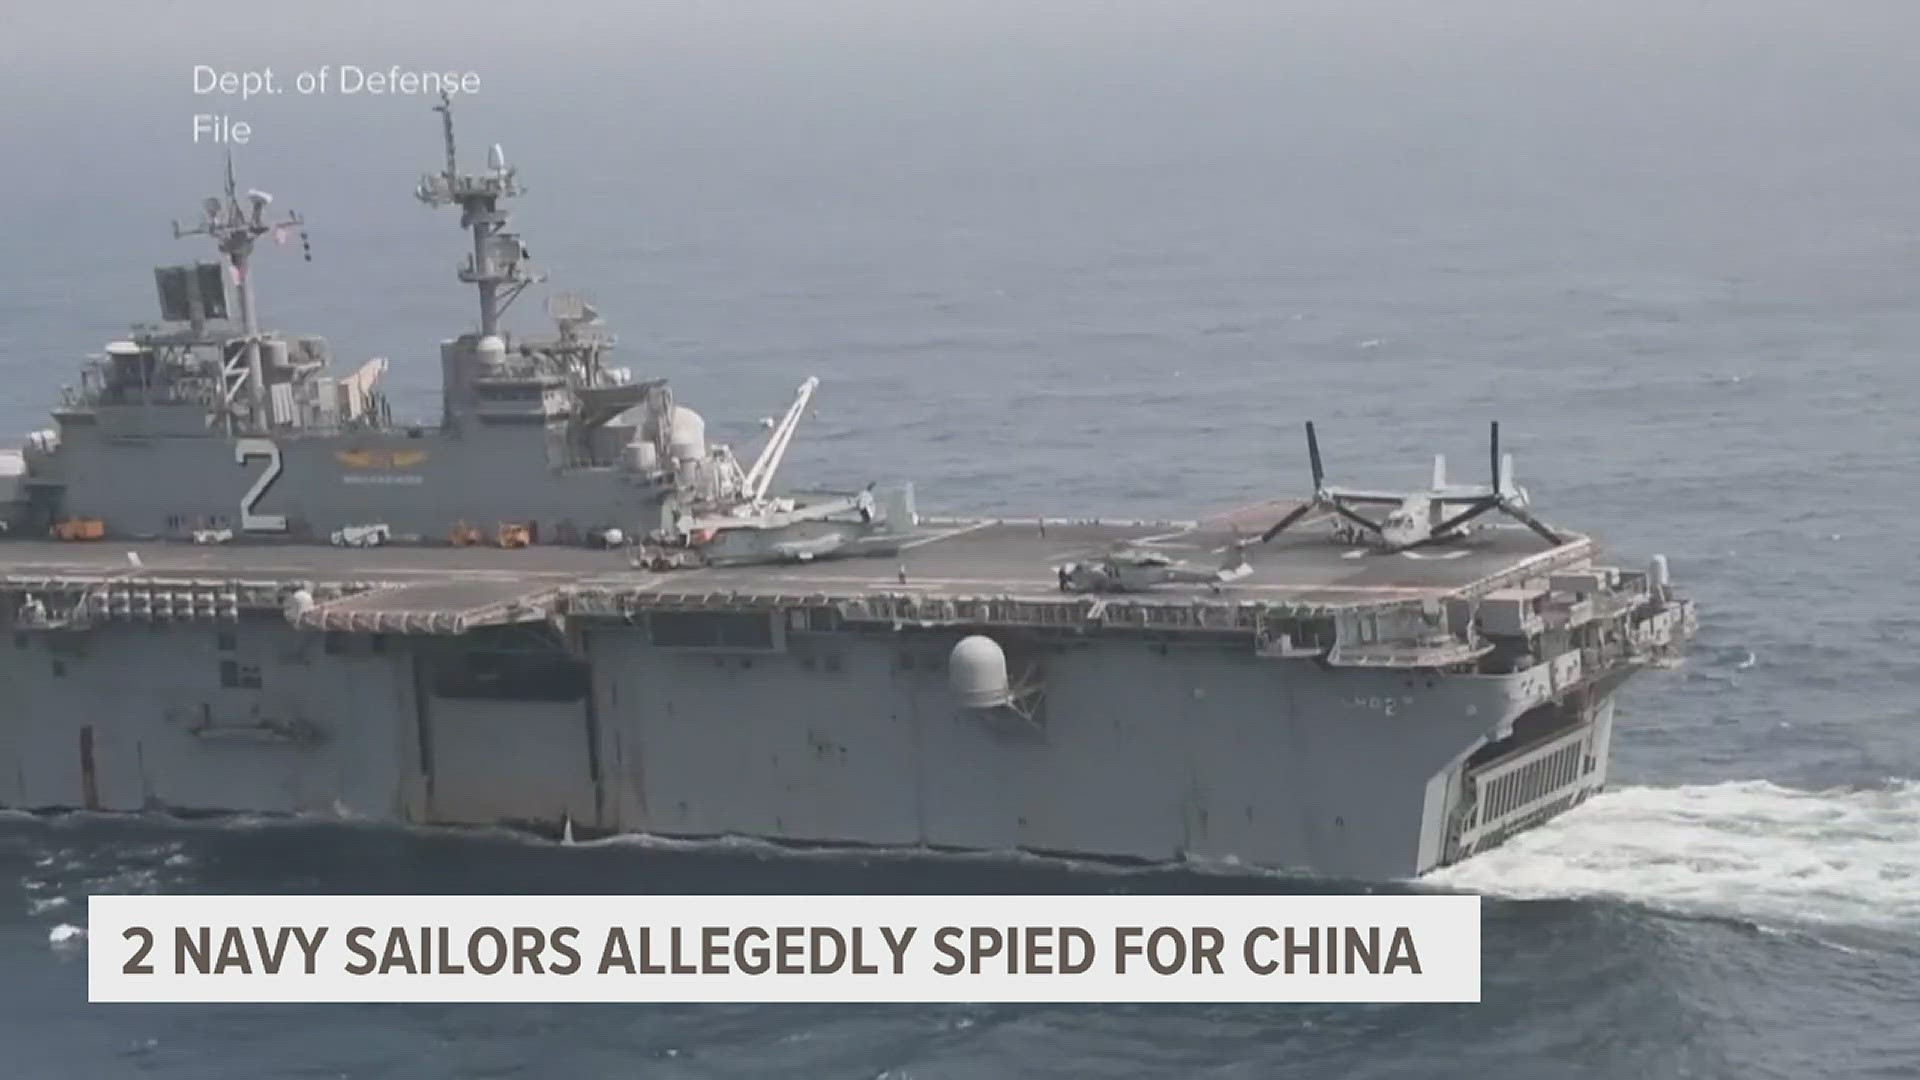 Authorities say they allegedly told China information regarding the defense and weapons capabilities of U.S. Navy warships.